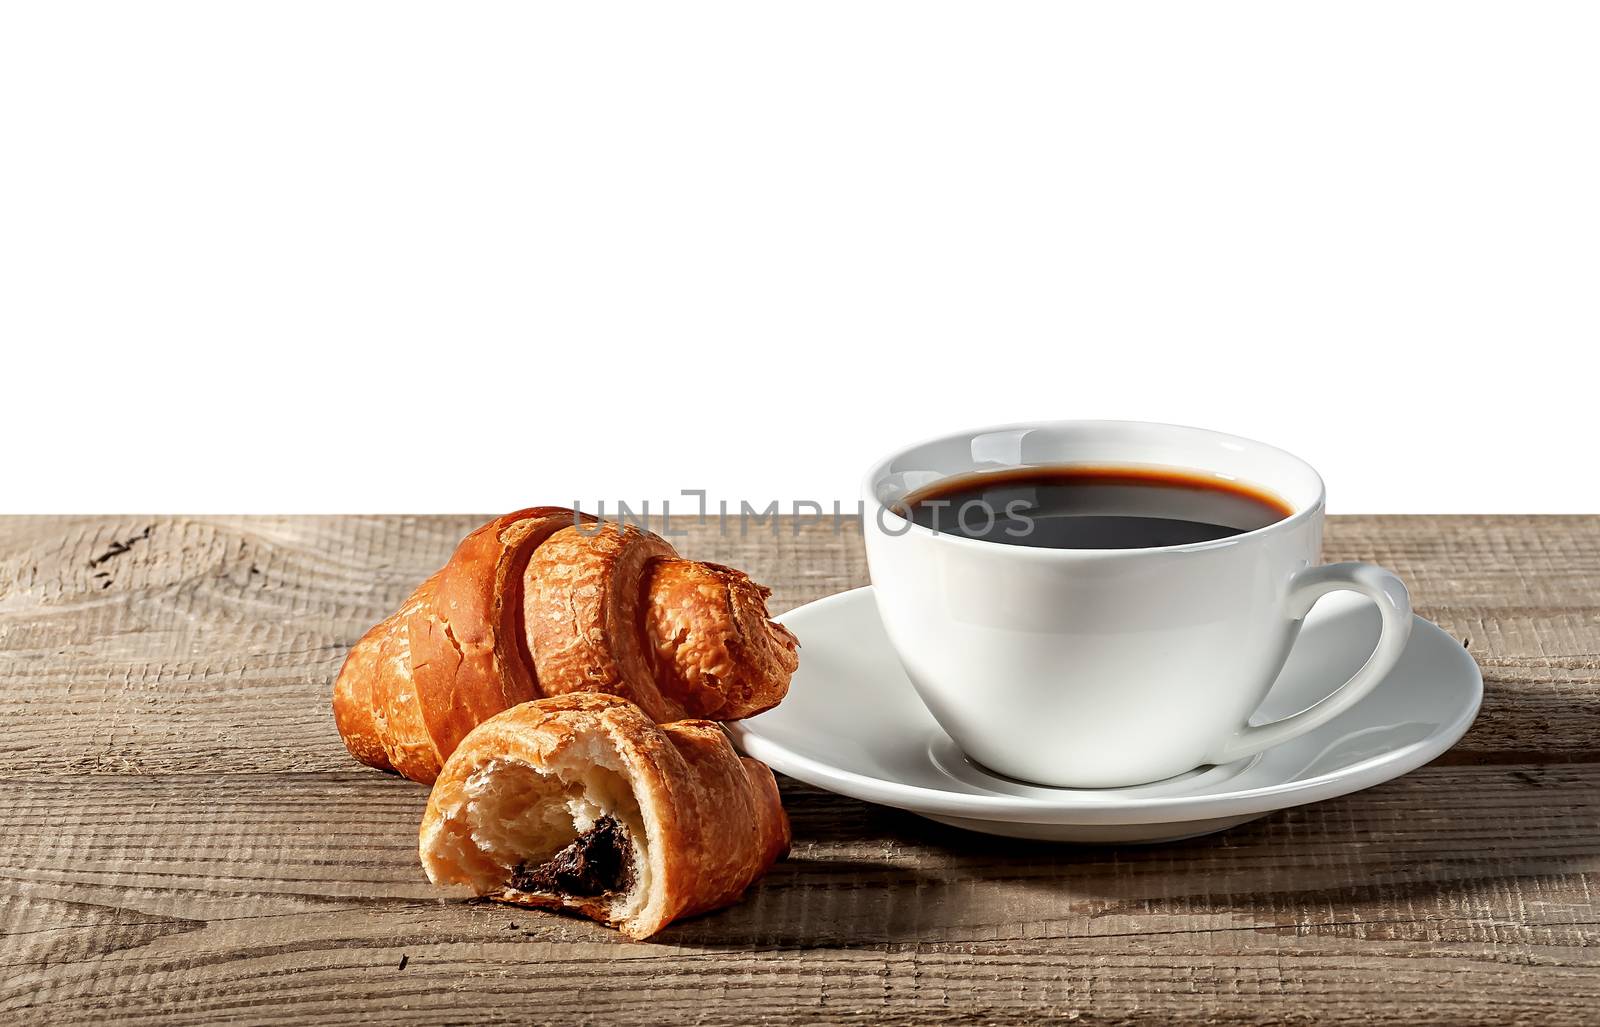 Coffee and croissants by Cipariss